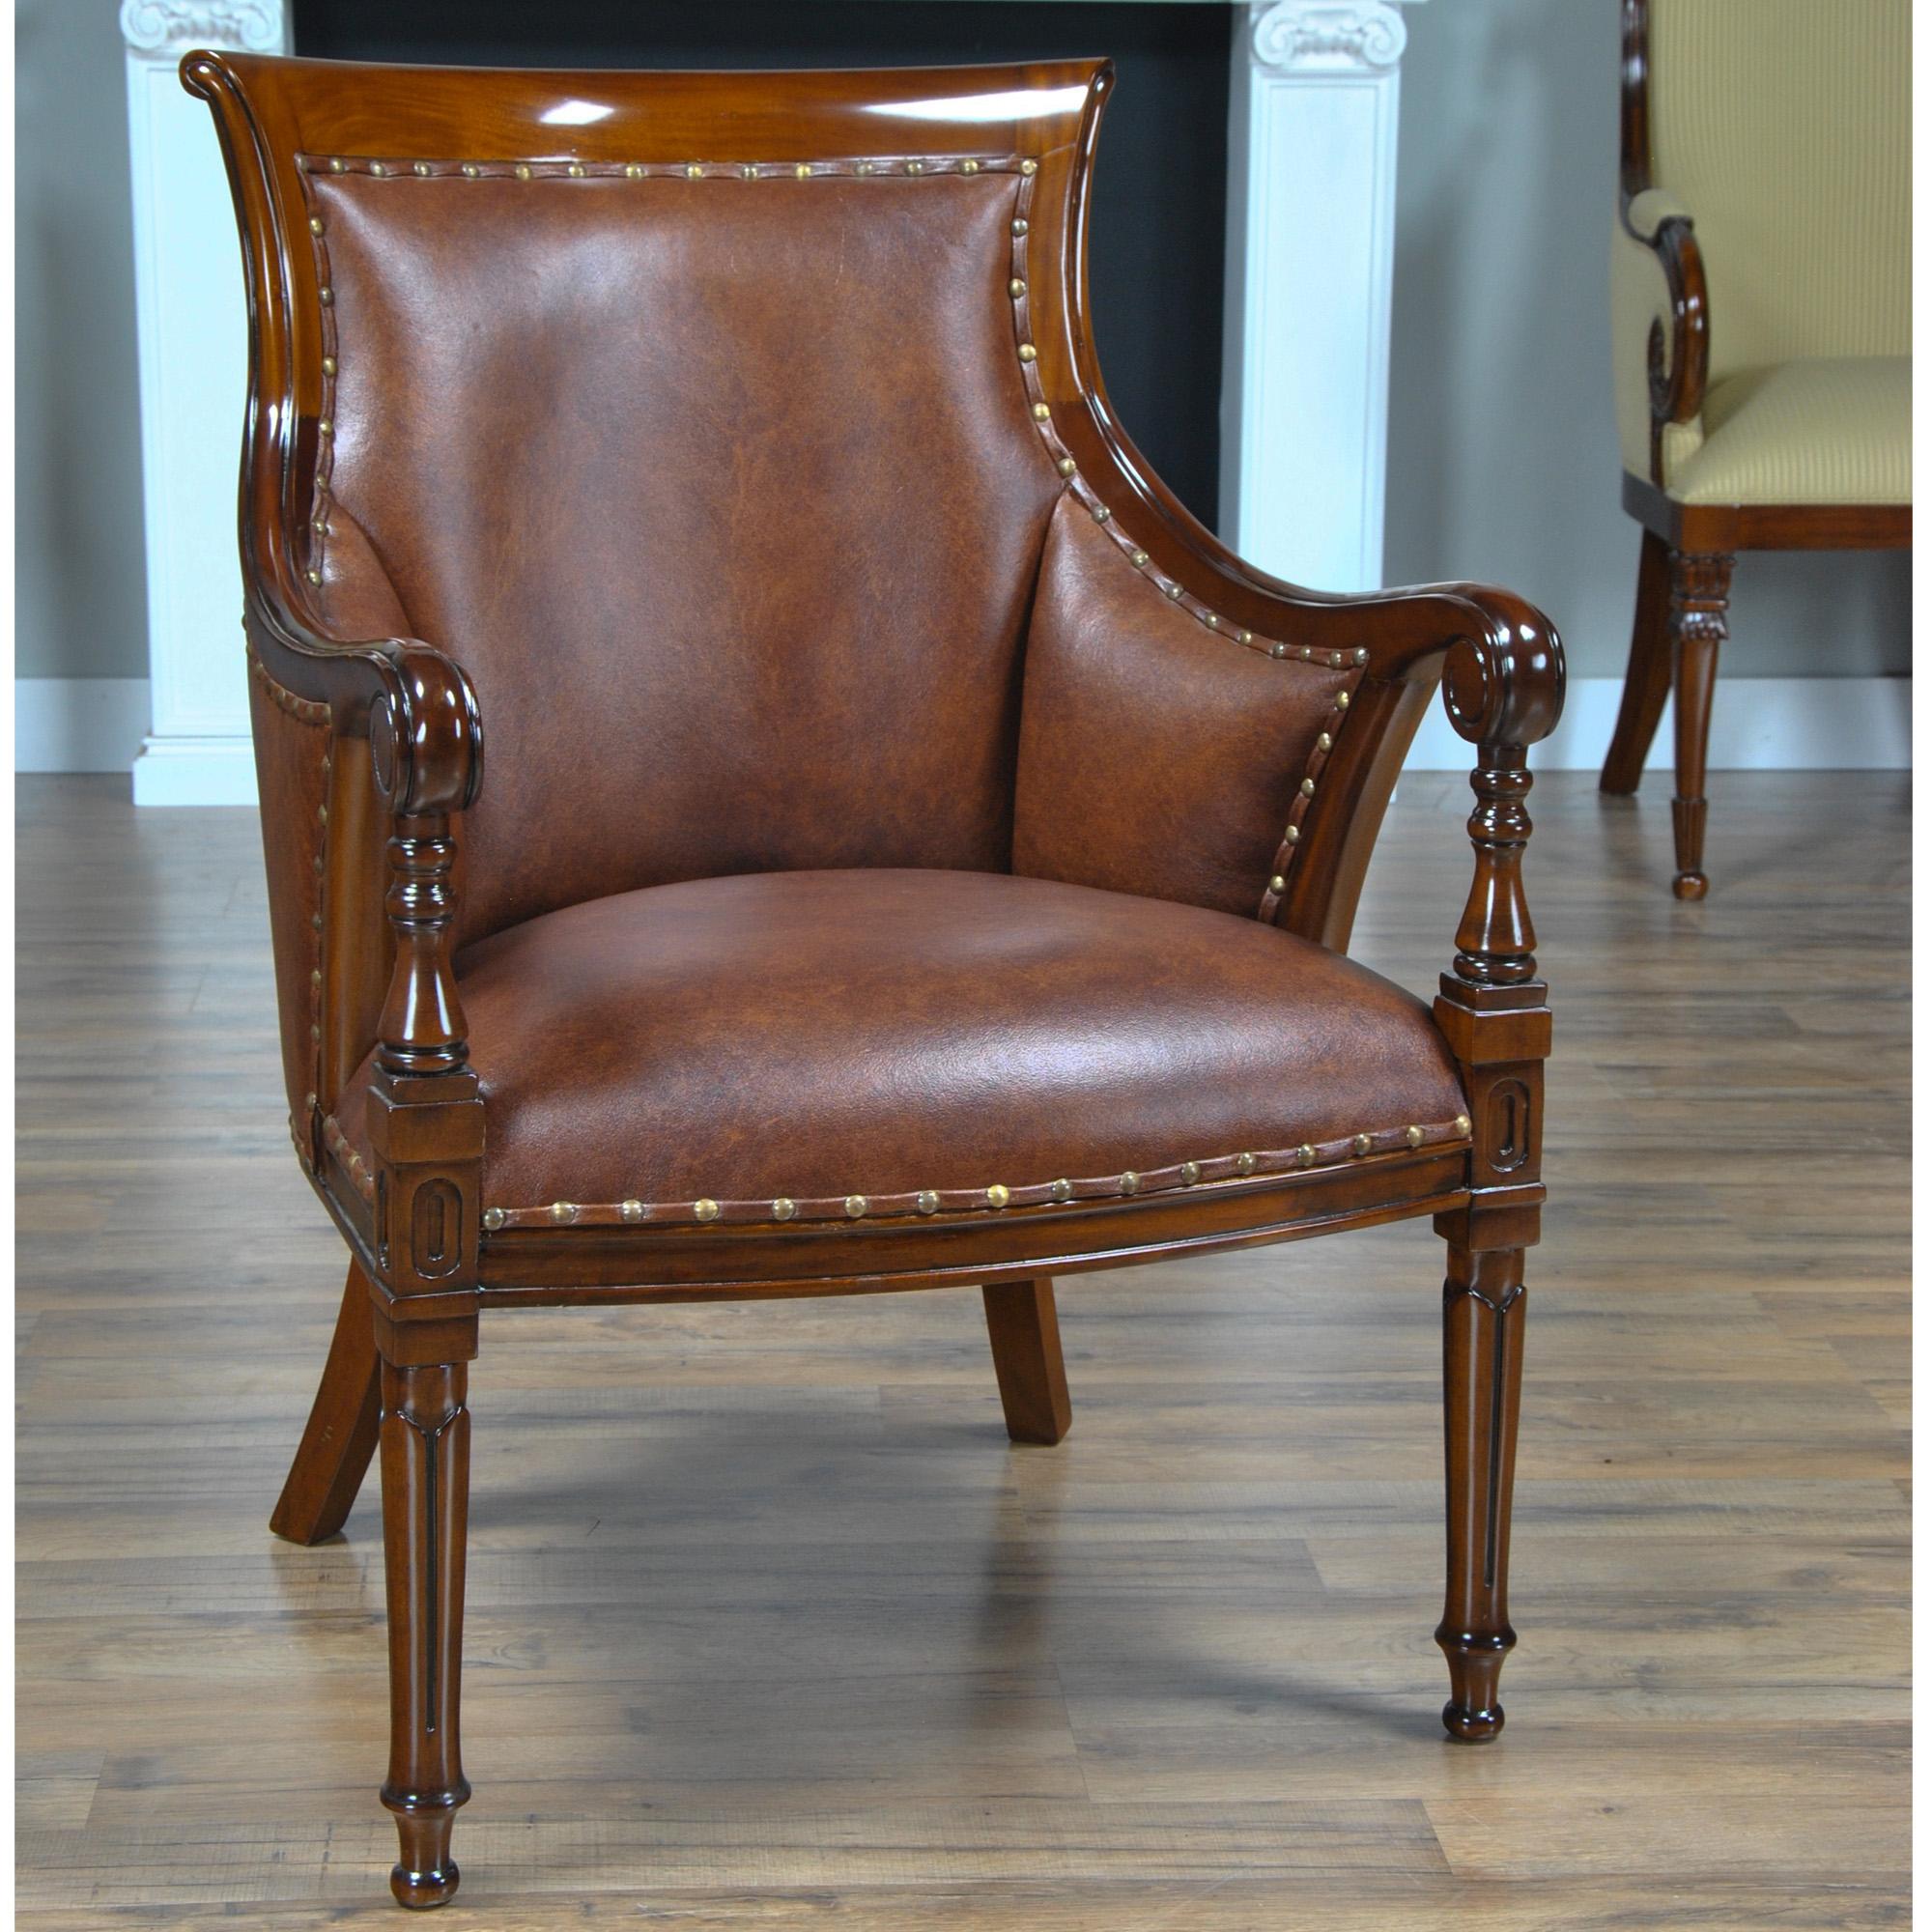 The Niagara Furniture Leather Regency Chair is upholstered using only genuine full gran leather and accented with brass nail trim. This Regency style chair is often used along the Niagara Furniture collection of office desks although the chair is